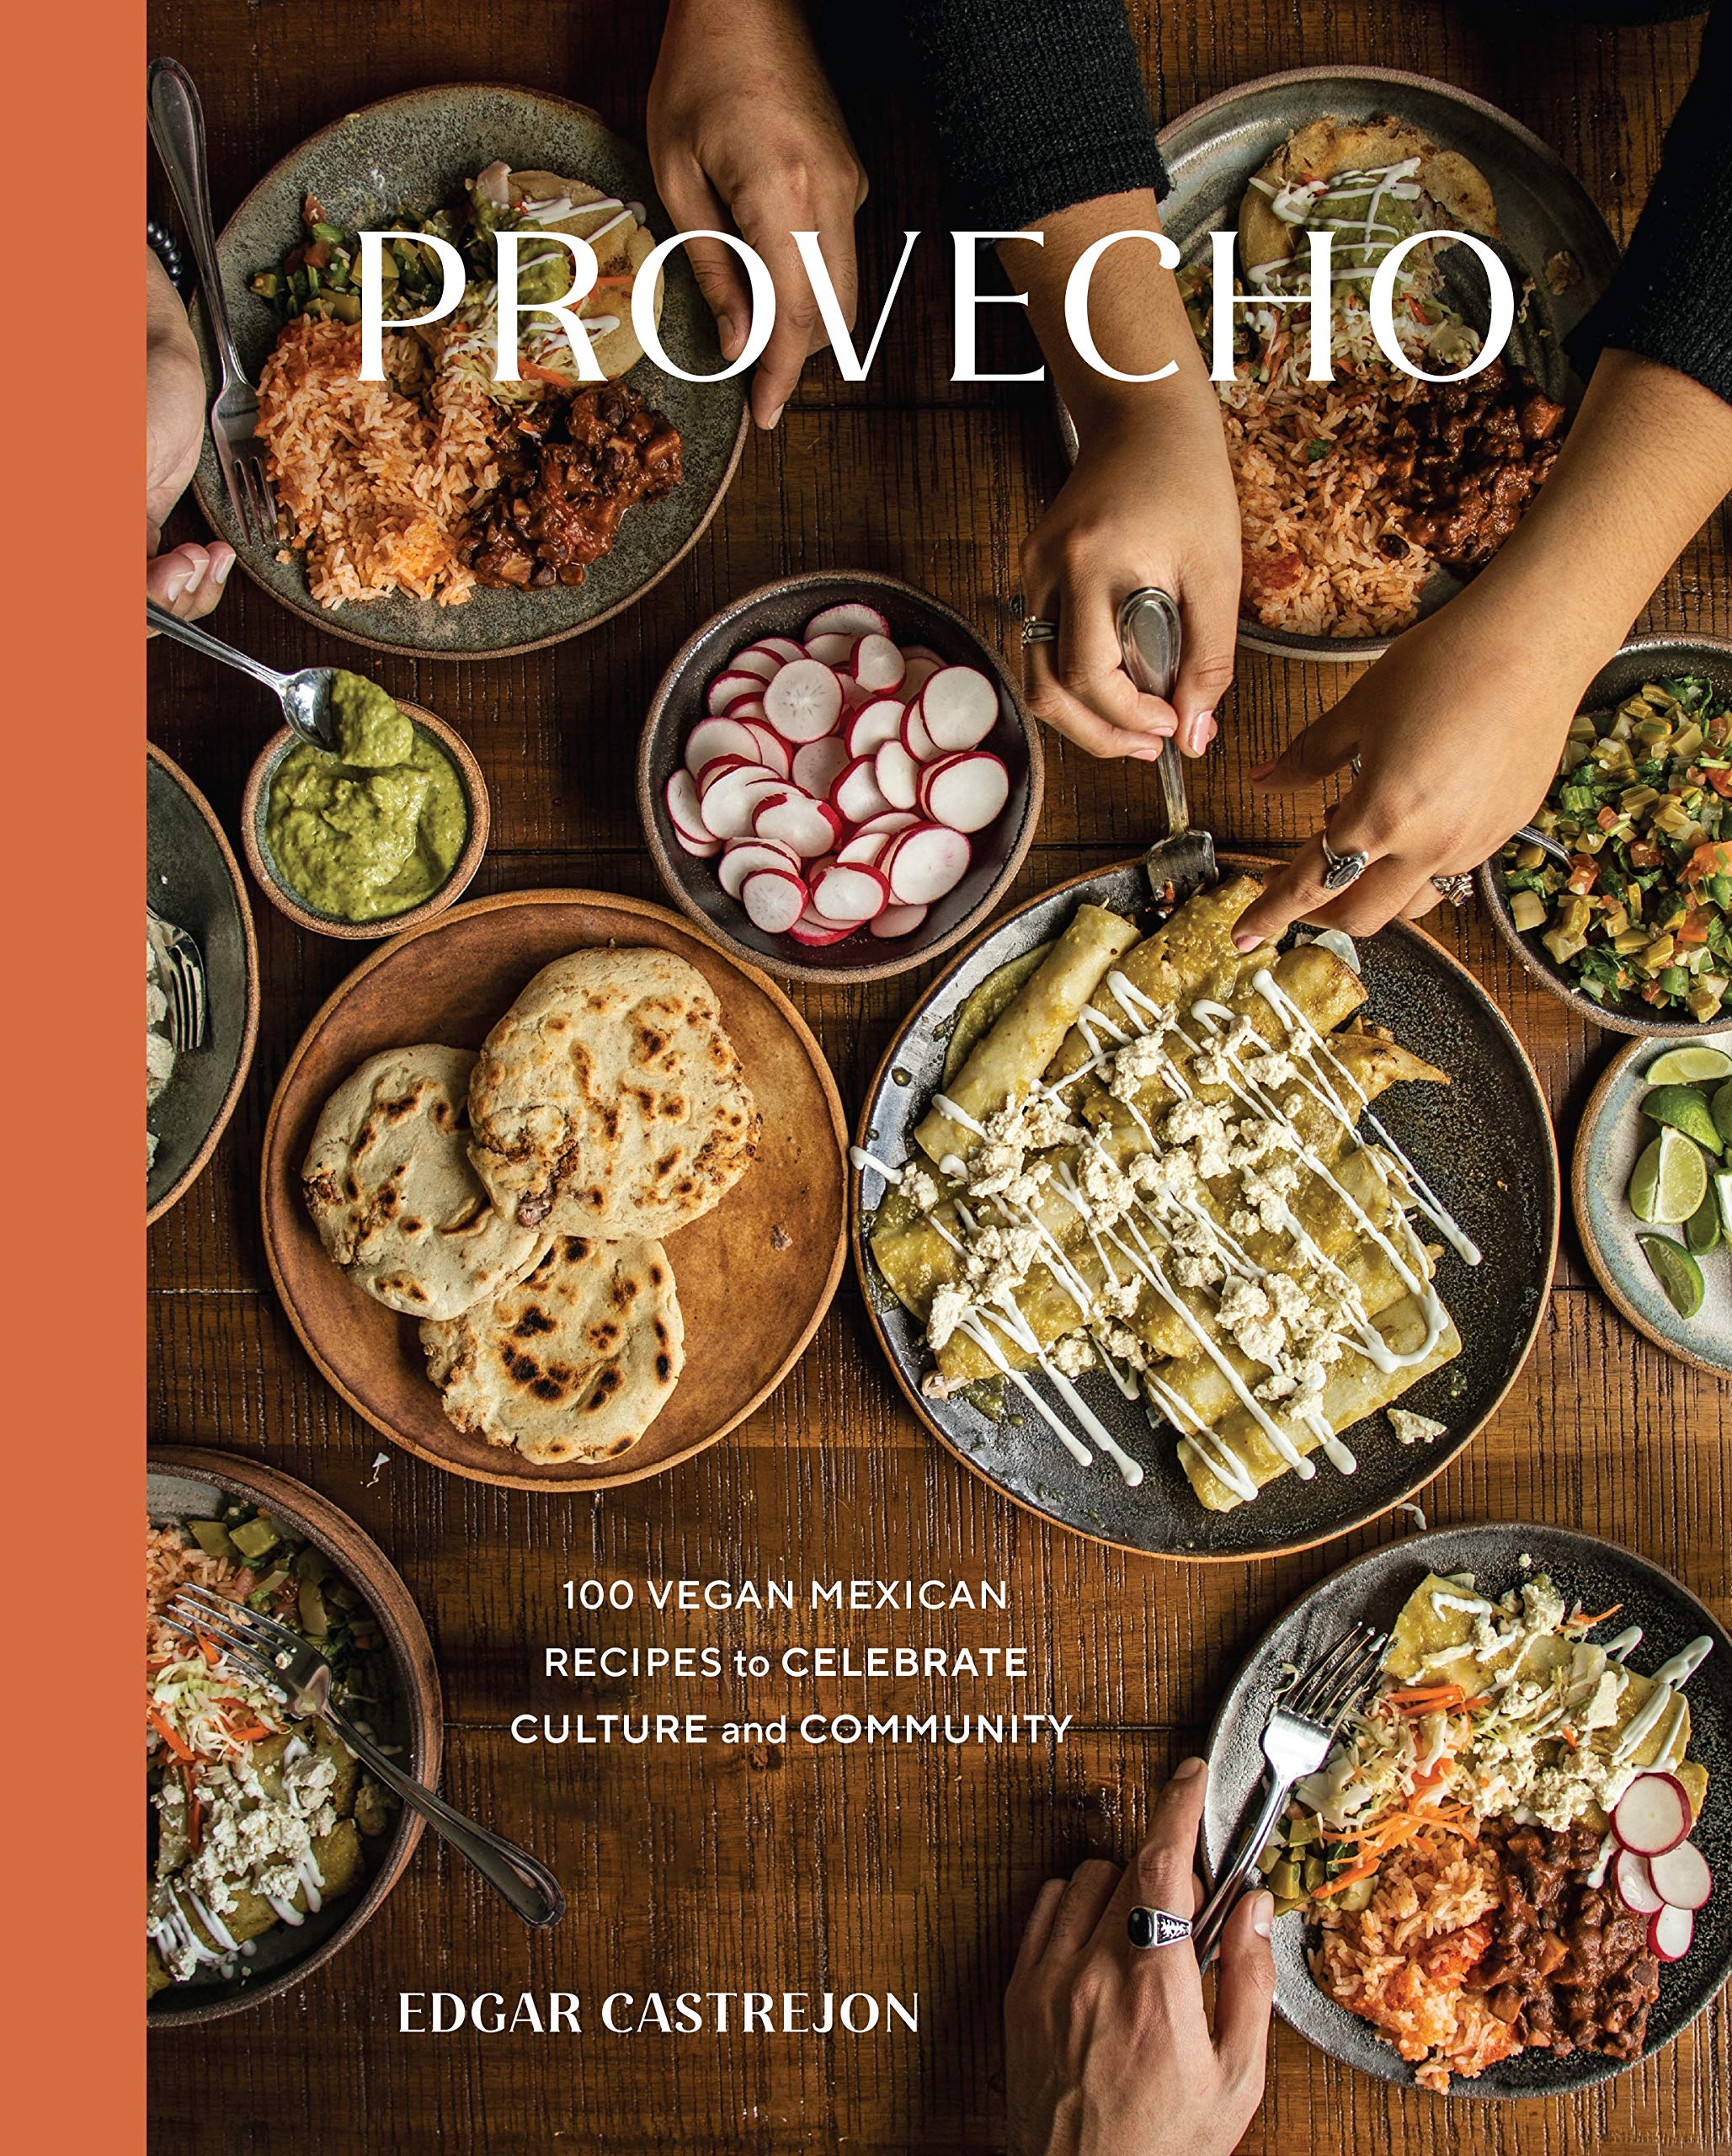 Provecho: 100 Vegan Mexican Recipes to Celebrate Culture and Community (Edgar Castrejón) *Signed*